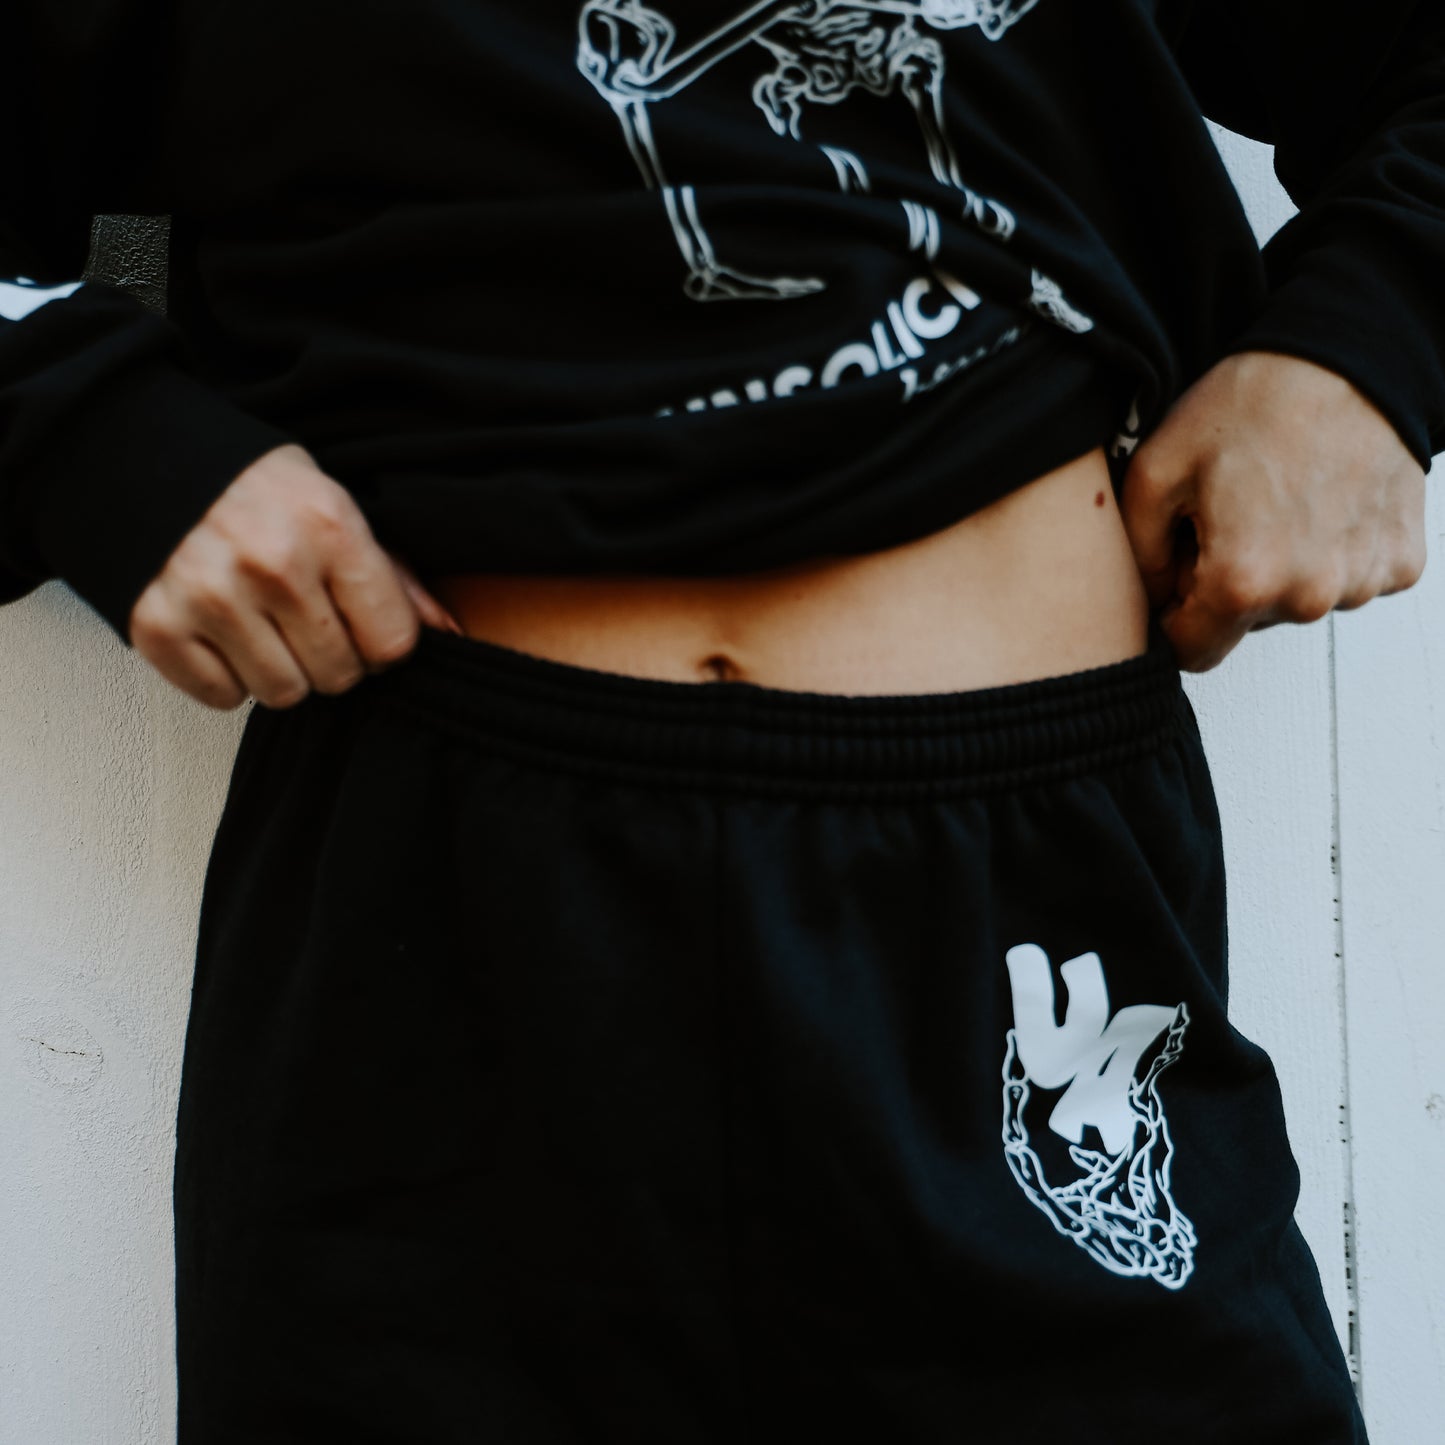 Unsolicited Advice: Skeleton Sweat Pants